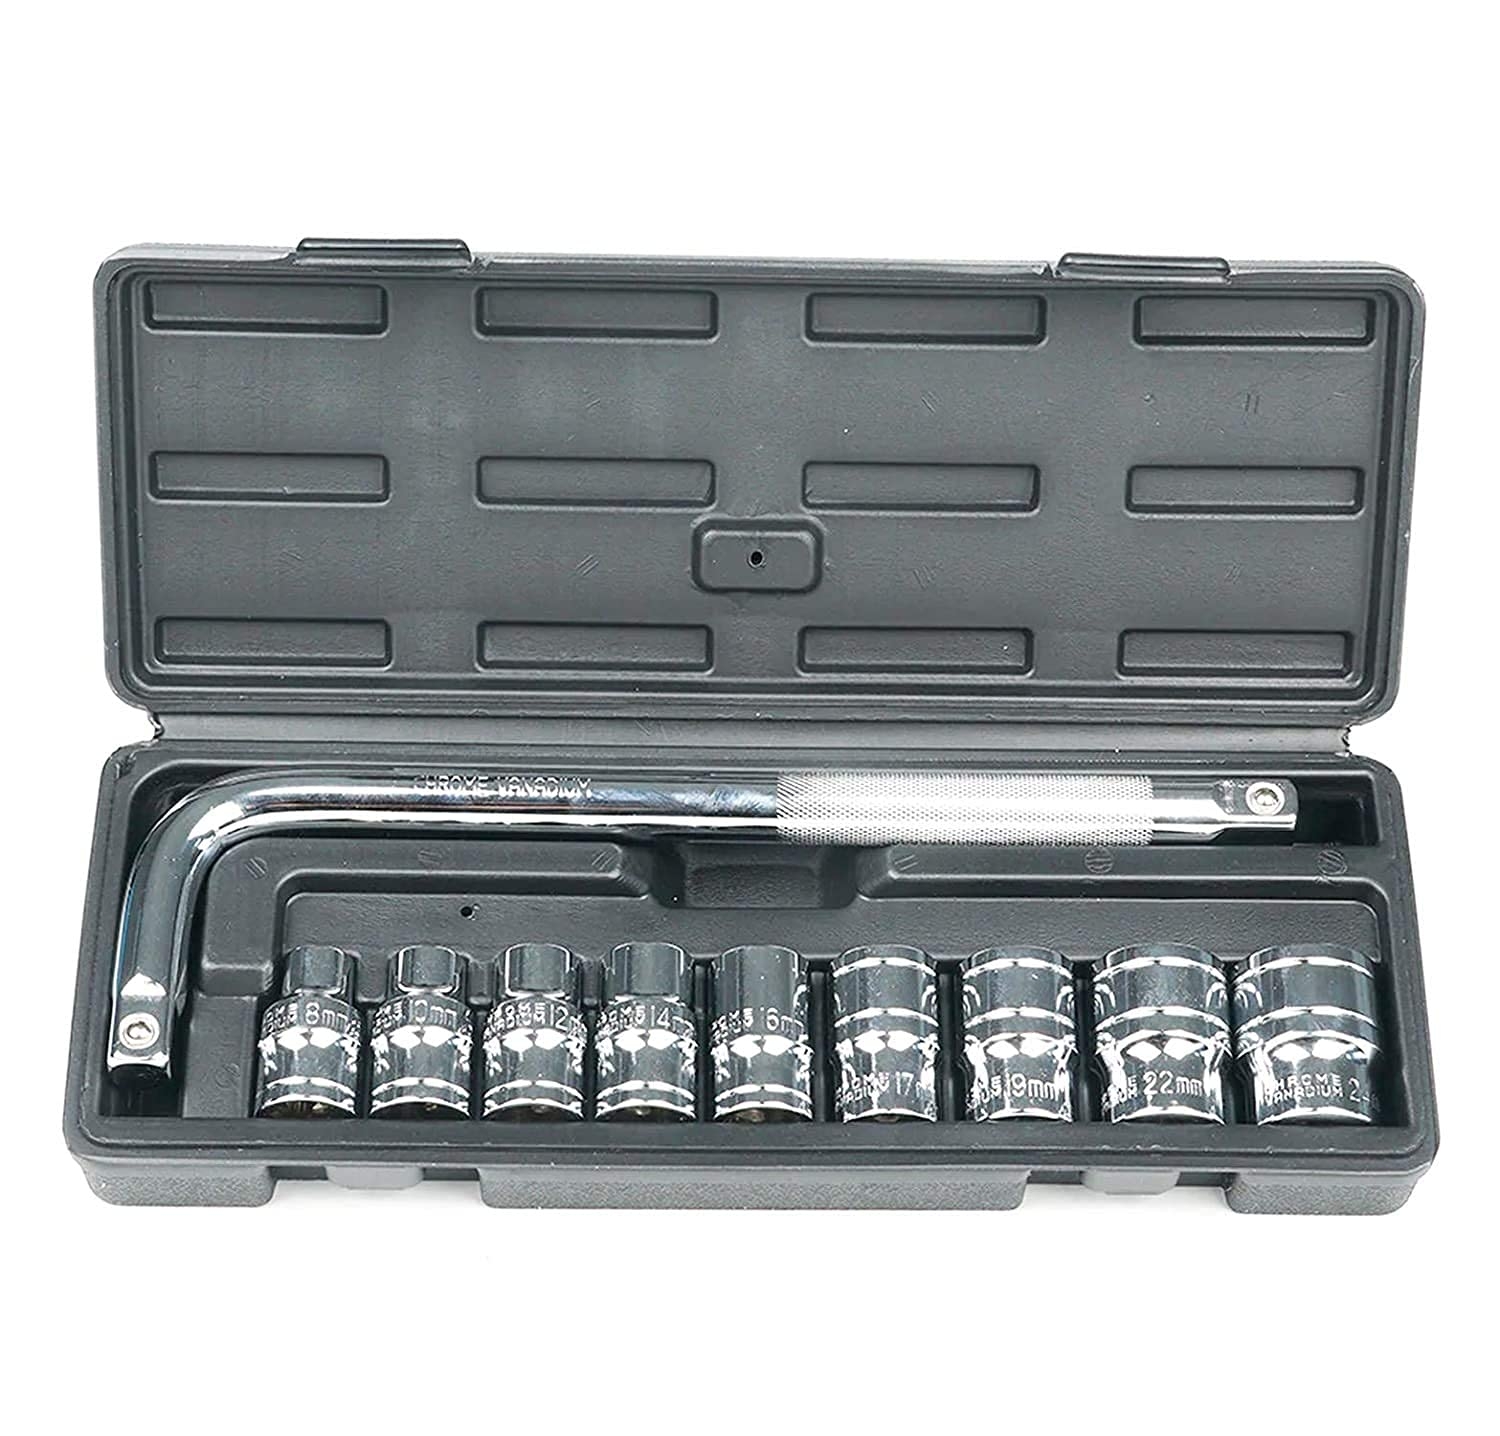 Elevea 10 in 1 Socket Wrench Spanner Set | Precision & Wrench Sleeve | Repair Tool Box | Combination Hand Tool kit